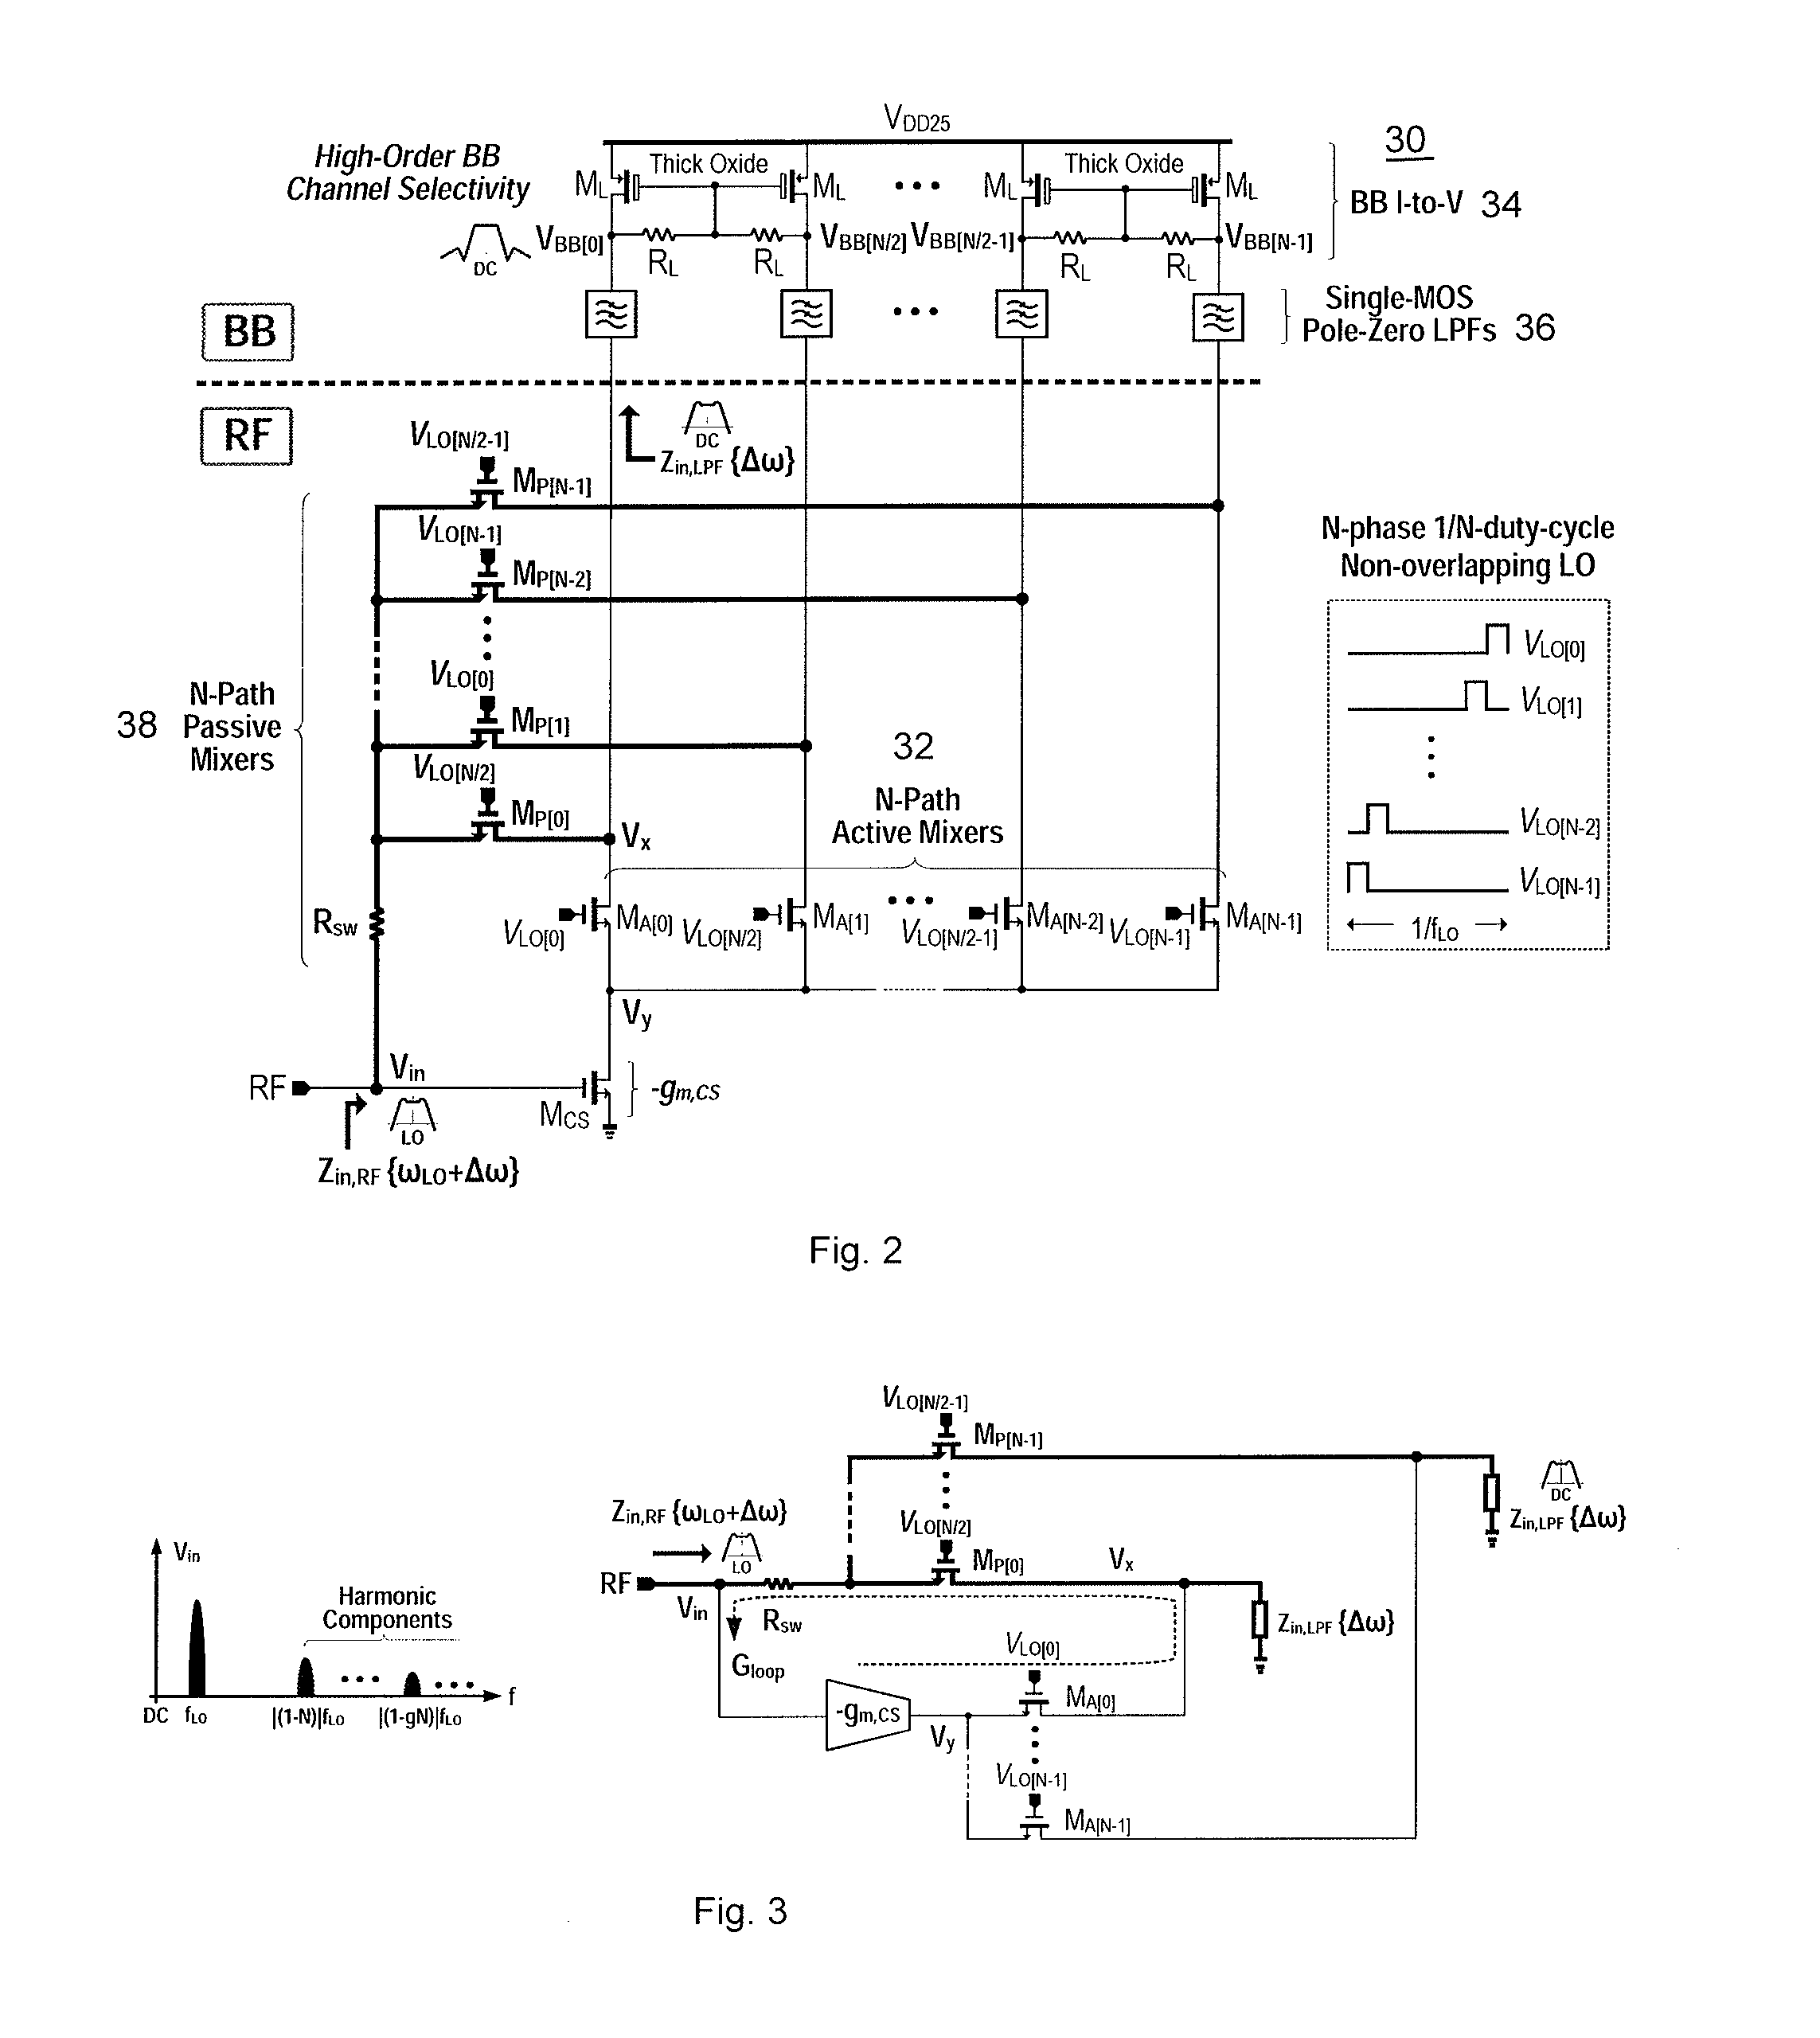 RF-to-BB-current-reuse wideband receiver with parallel N-path active/passive mixers